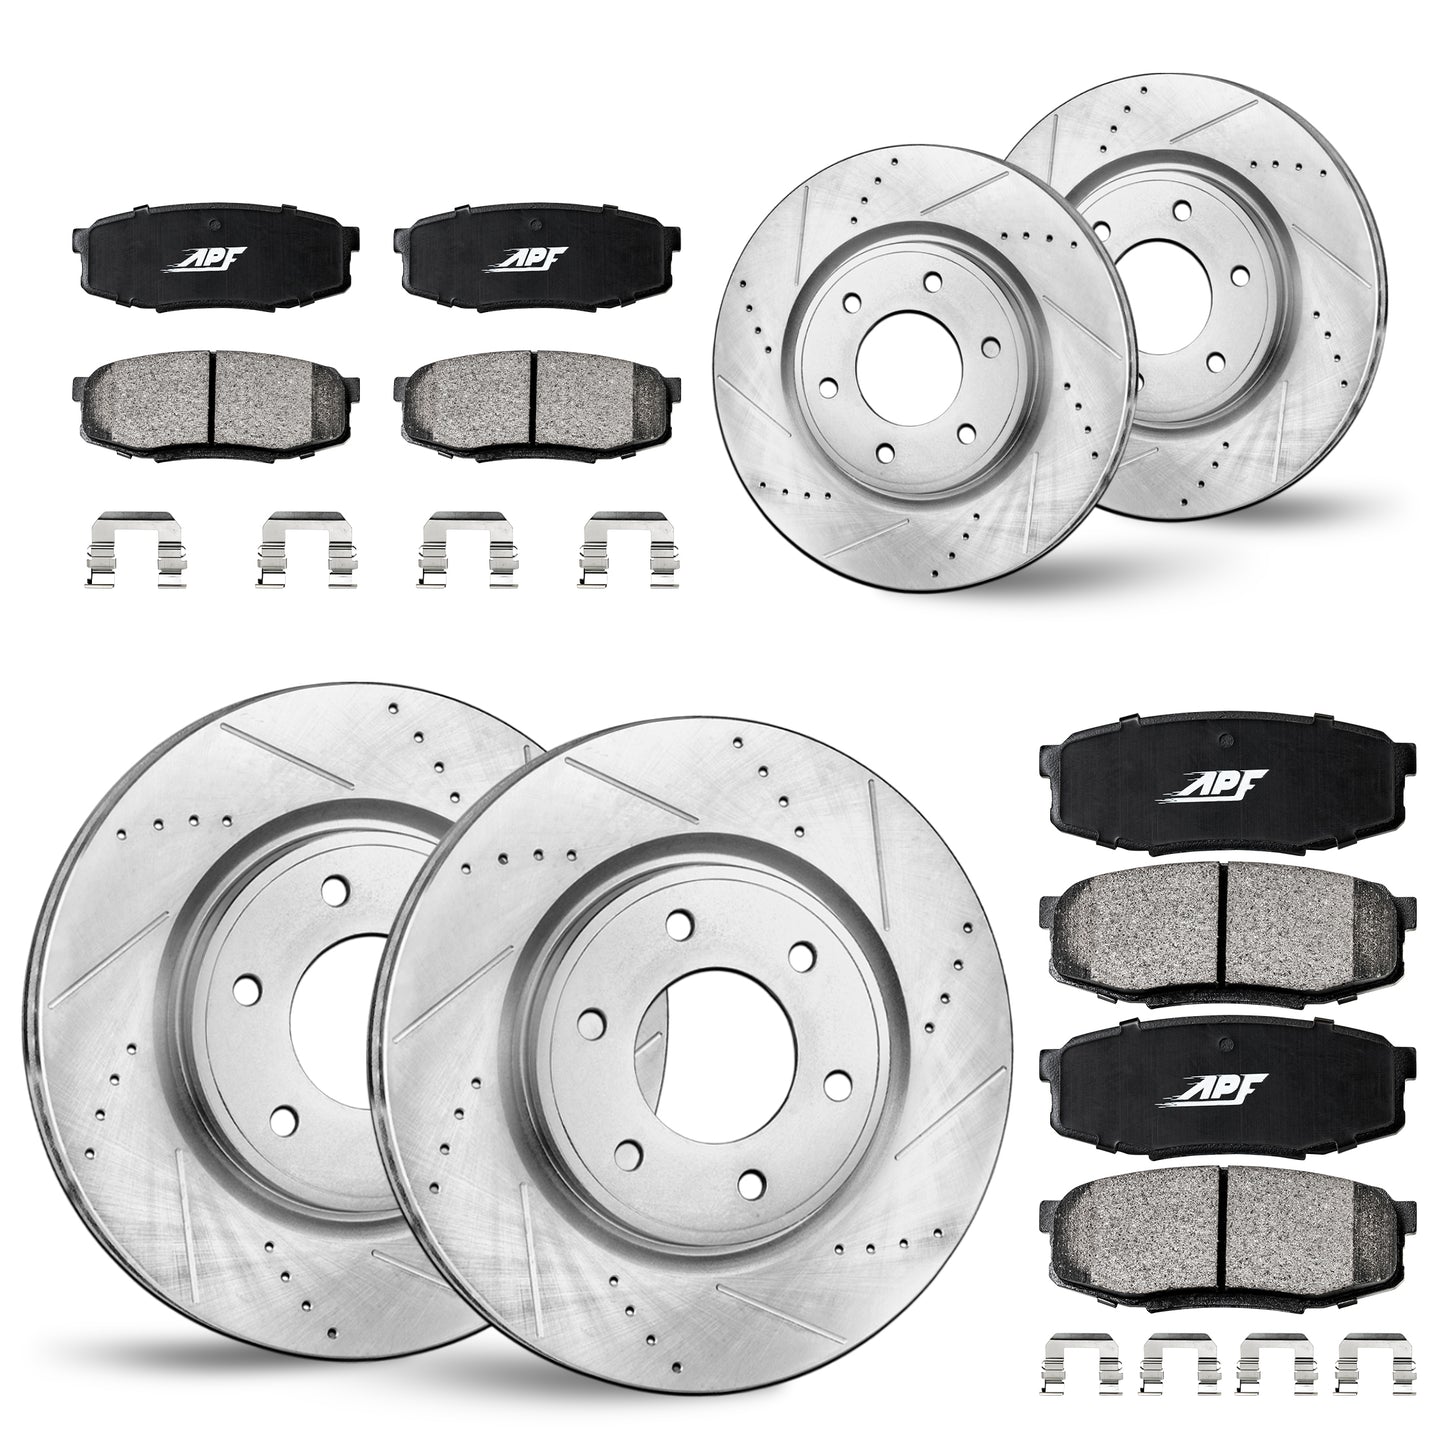 APF Full Kit compatible with Chevrolet Express 2500 2003-2005 | Zinc Drilled Slotted Rotors with Ceramic Carbon Fiber Brake Pads